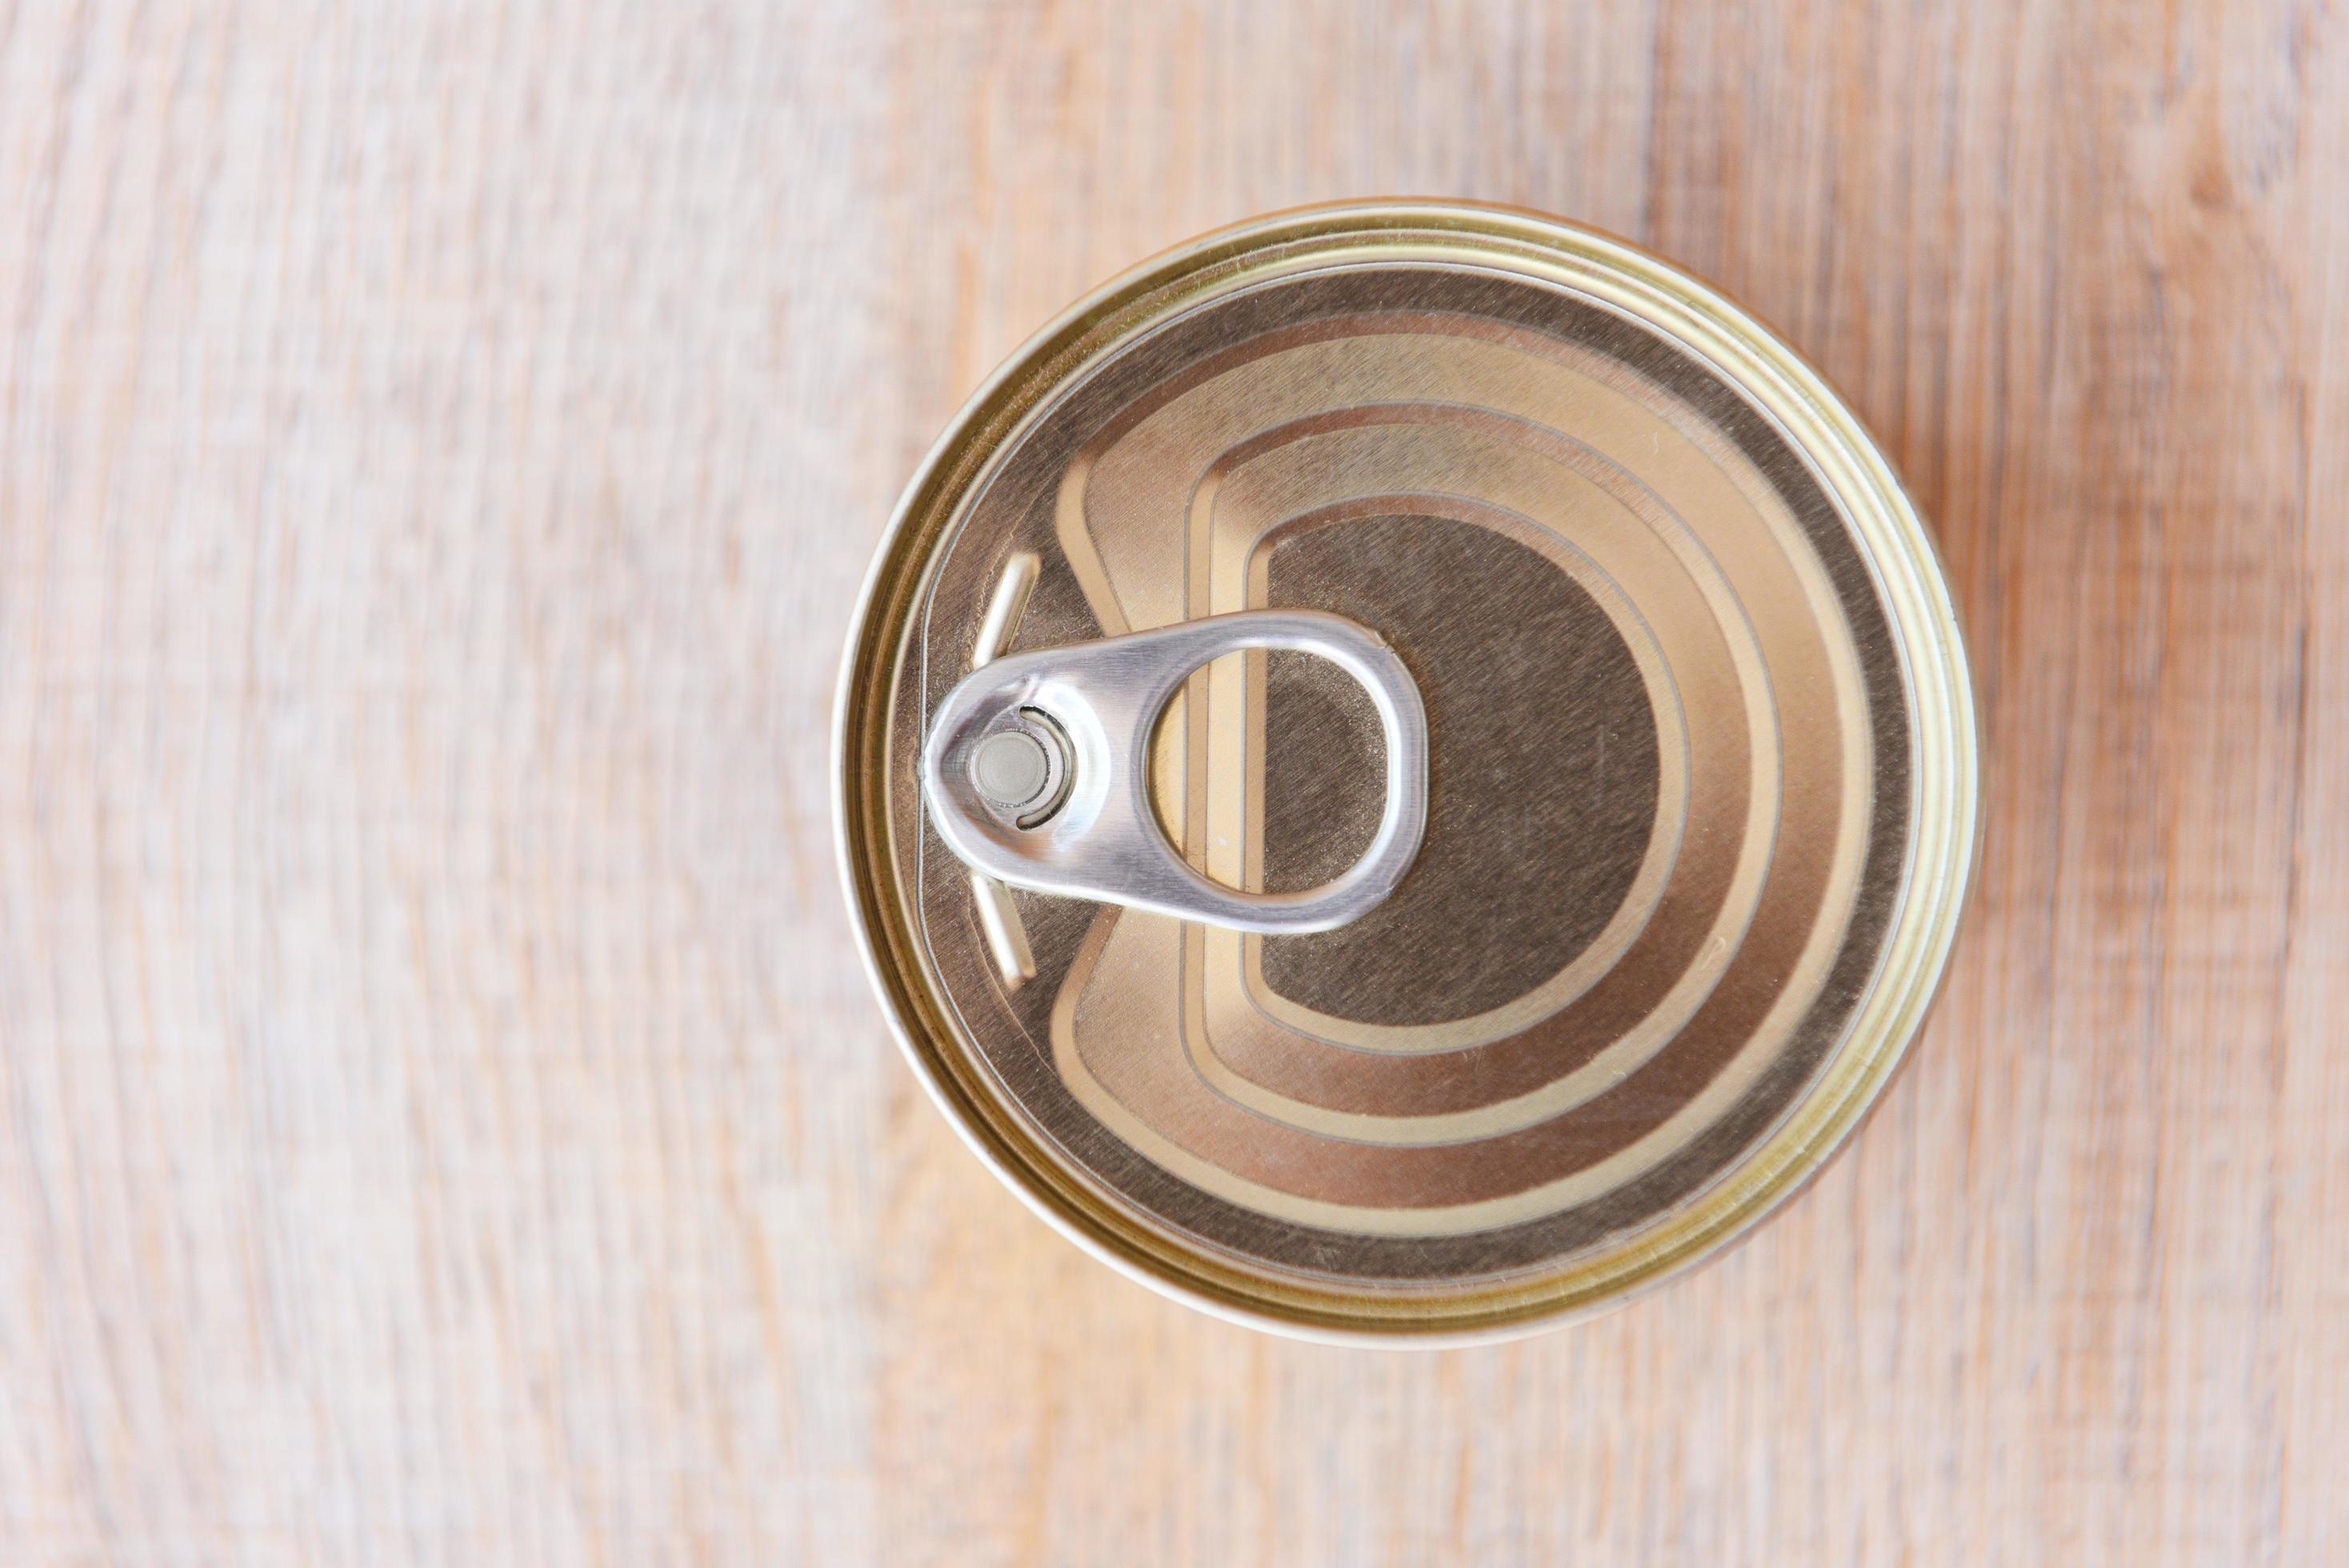 https://static.vecteezy.com/system/resources/previews/005/192/694/large_2x/various-canned-food-in-metal-cans-on-wooden-background-top-view-canned-goods-non-perishable-food-storage-goods-in-kitchen-home-or-for-donations-free-photo.JPG